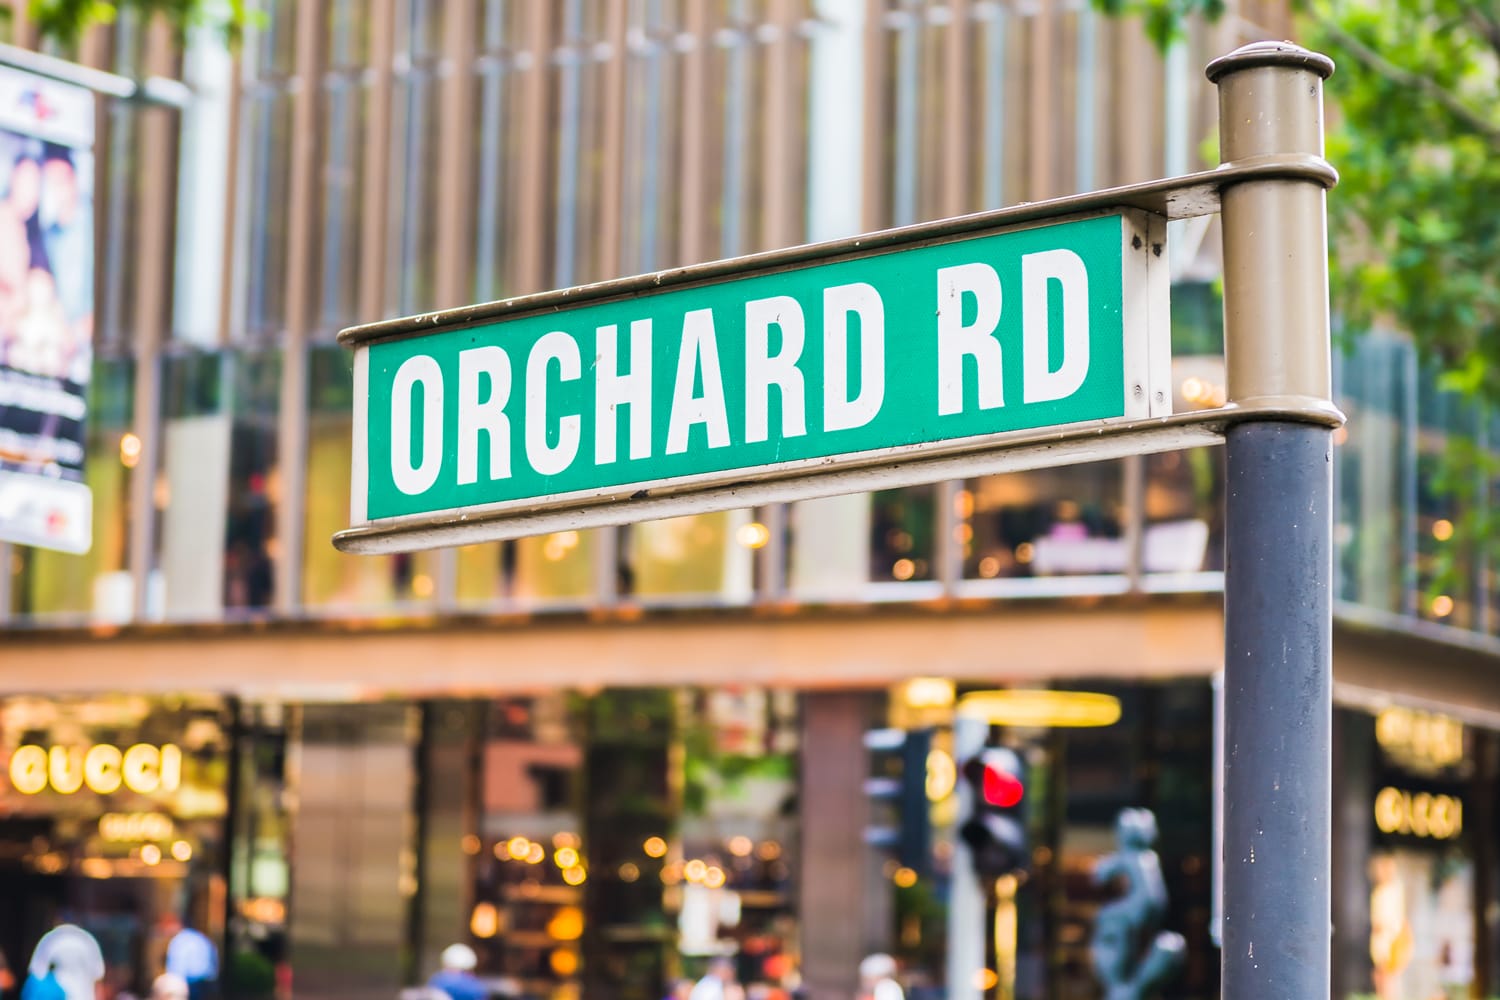 Orchard Road sign in Singapore